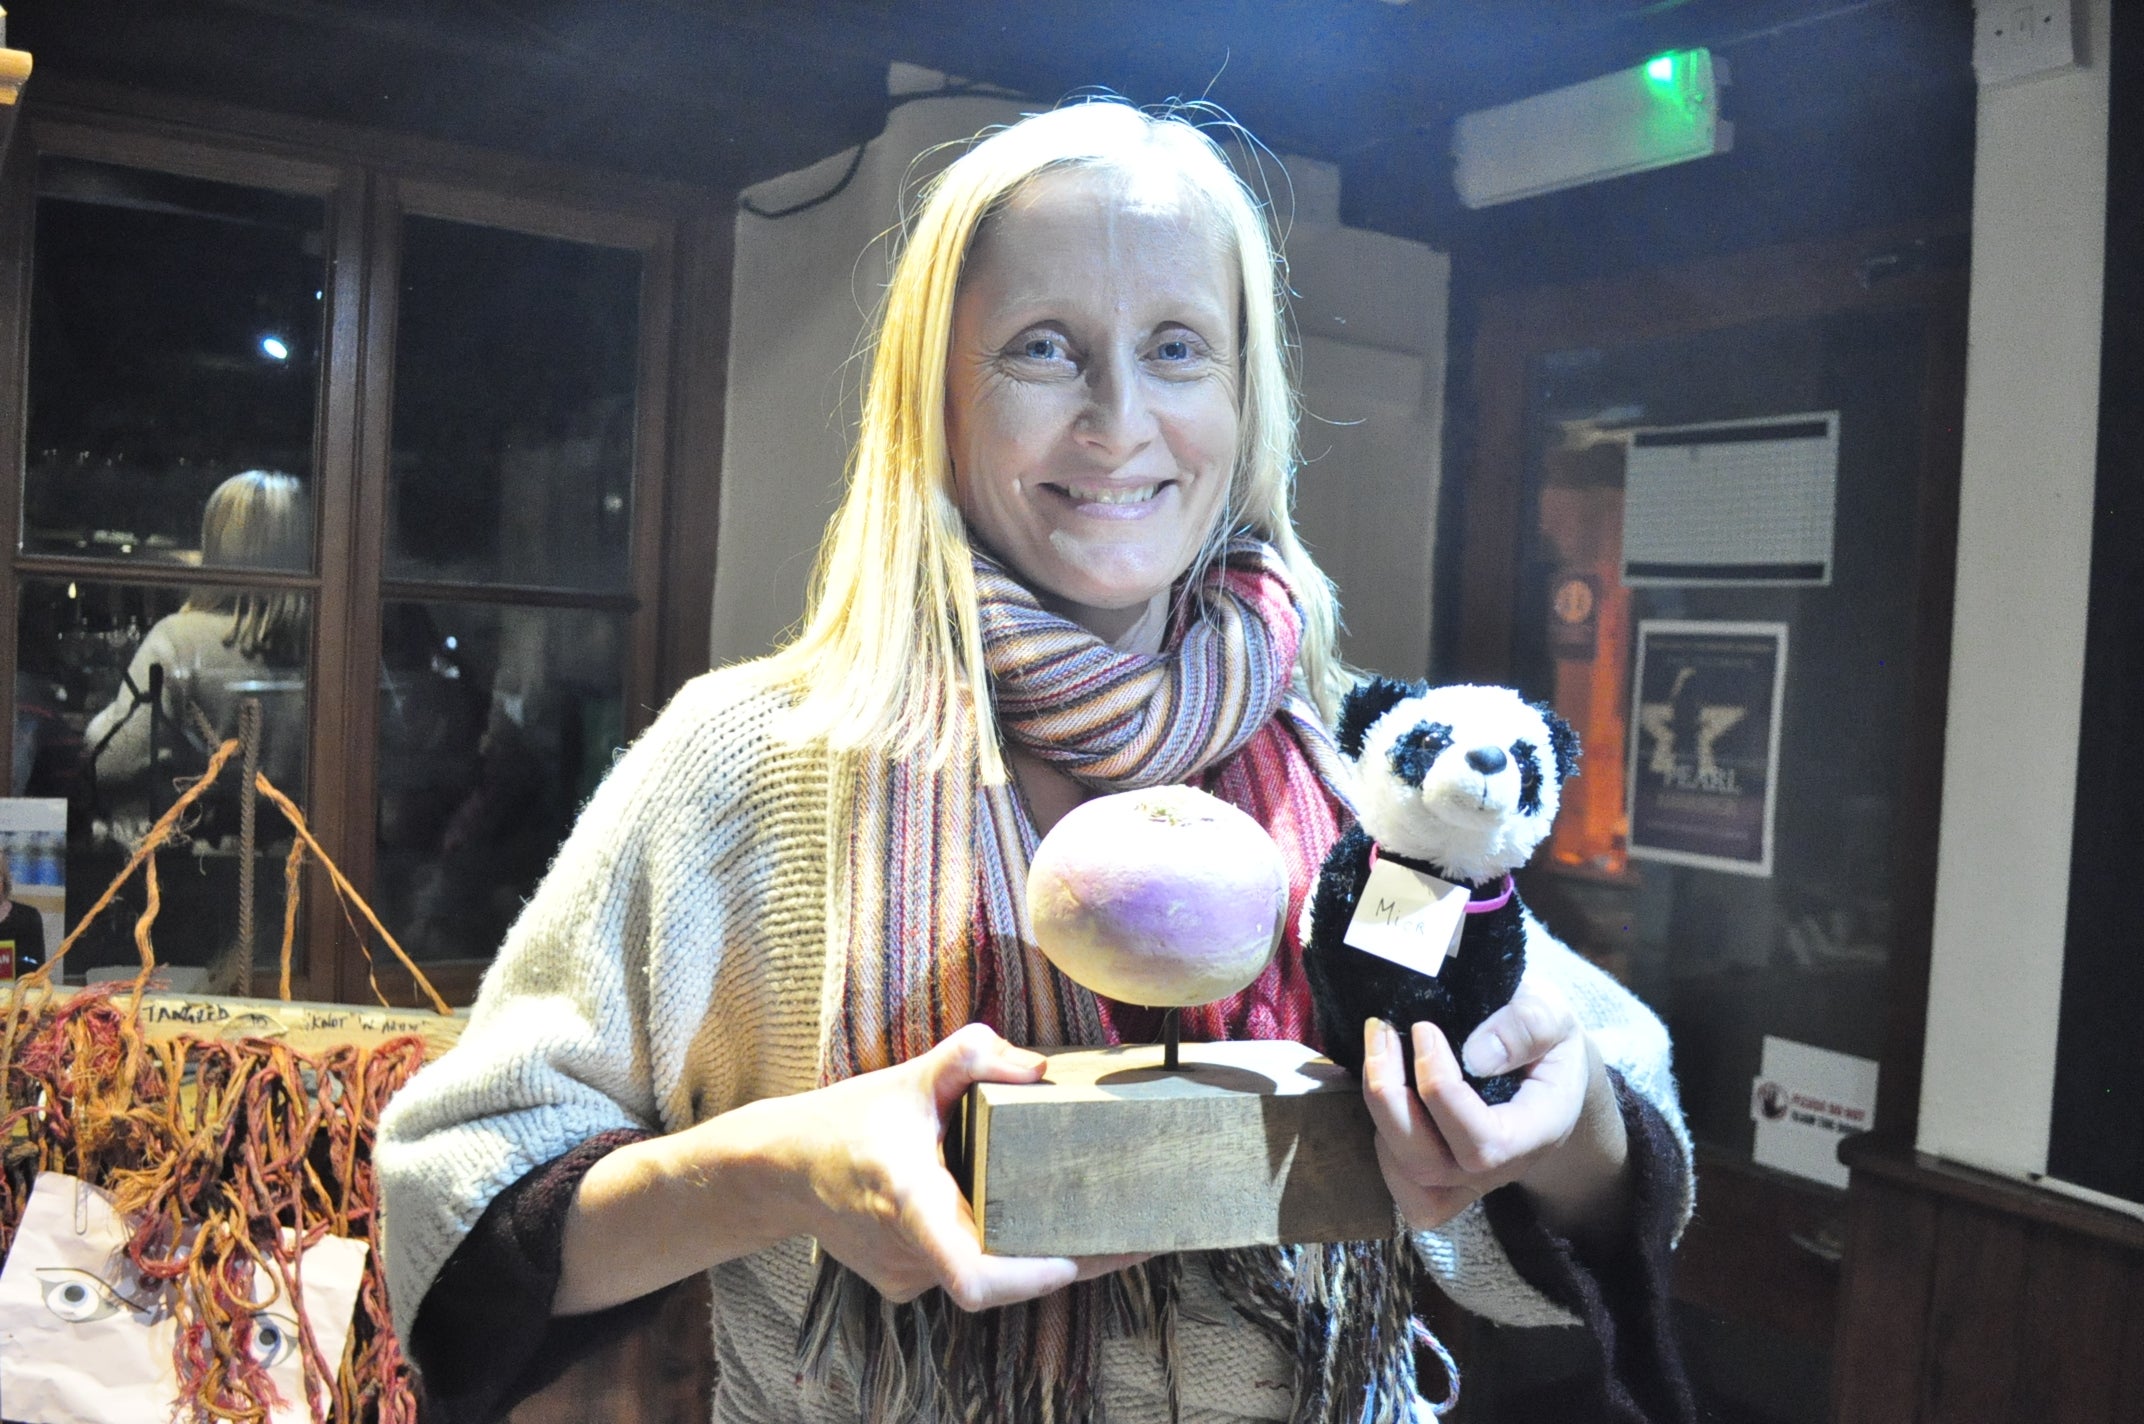 Emma Jones, the winner’s representative, with the Turnip Prize and the “Panda Mick” (A panda called Mick (Pandemic)) entry (Turnip Prize/PA).